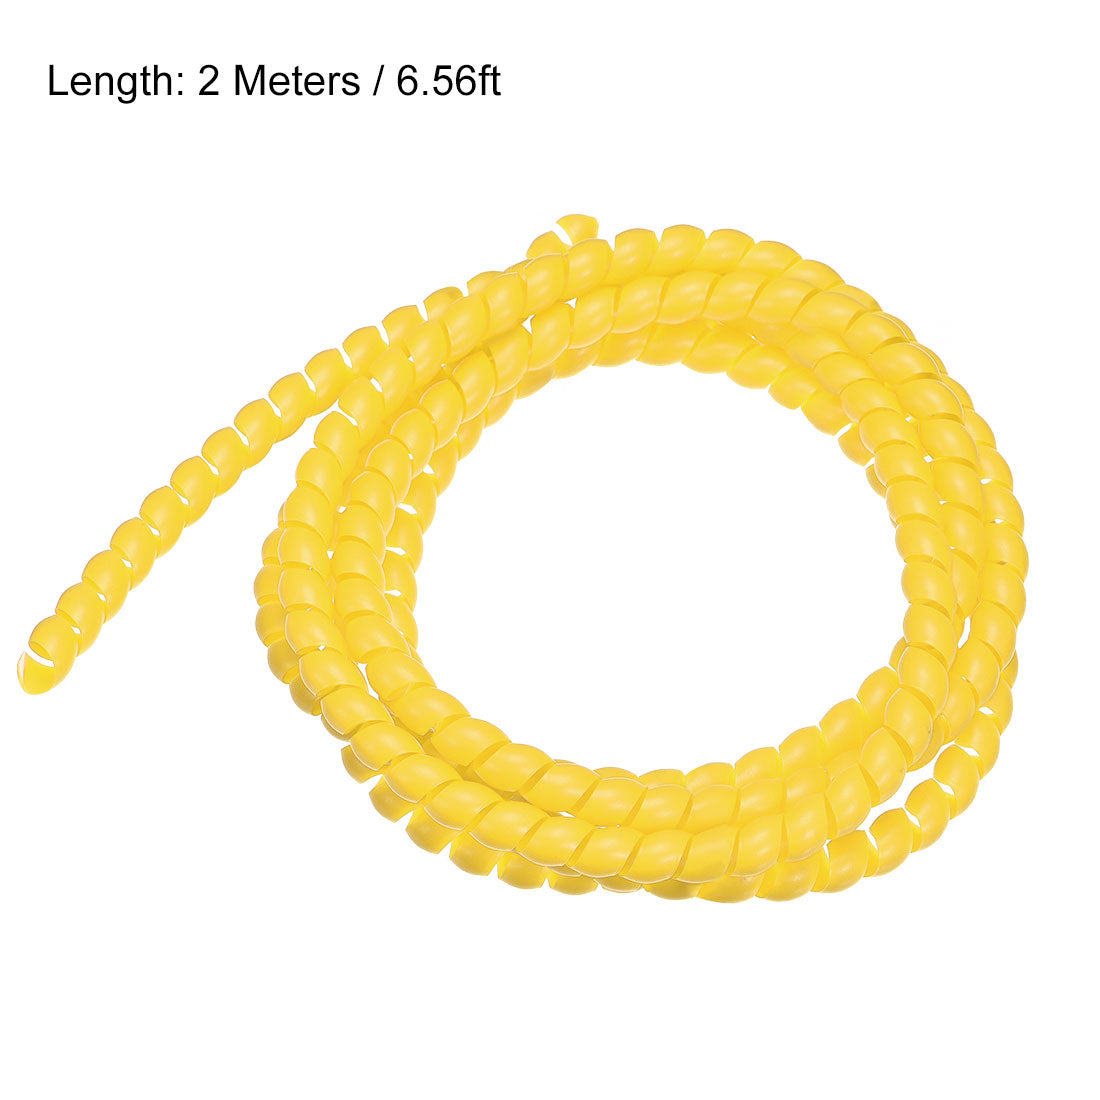 uxcell Uxcell Flexible Spiral Tube Wrap Cable Management Sleeve 8mm x 10mm Computer Wire Manage Cord 2 Meters Length Yellow